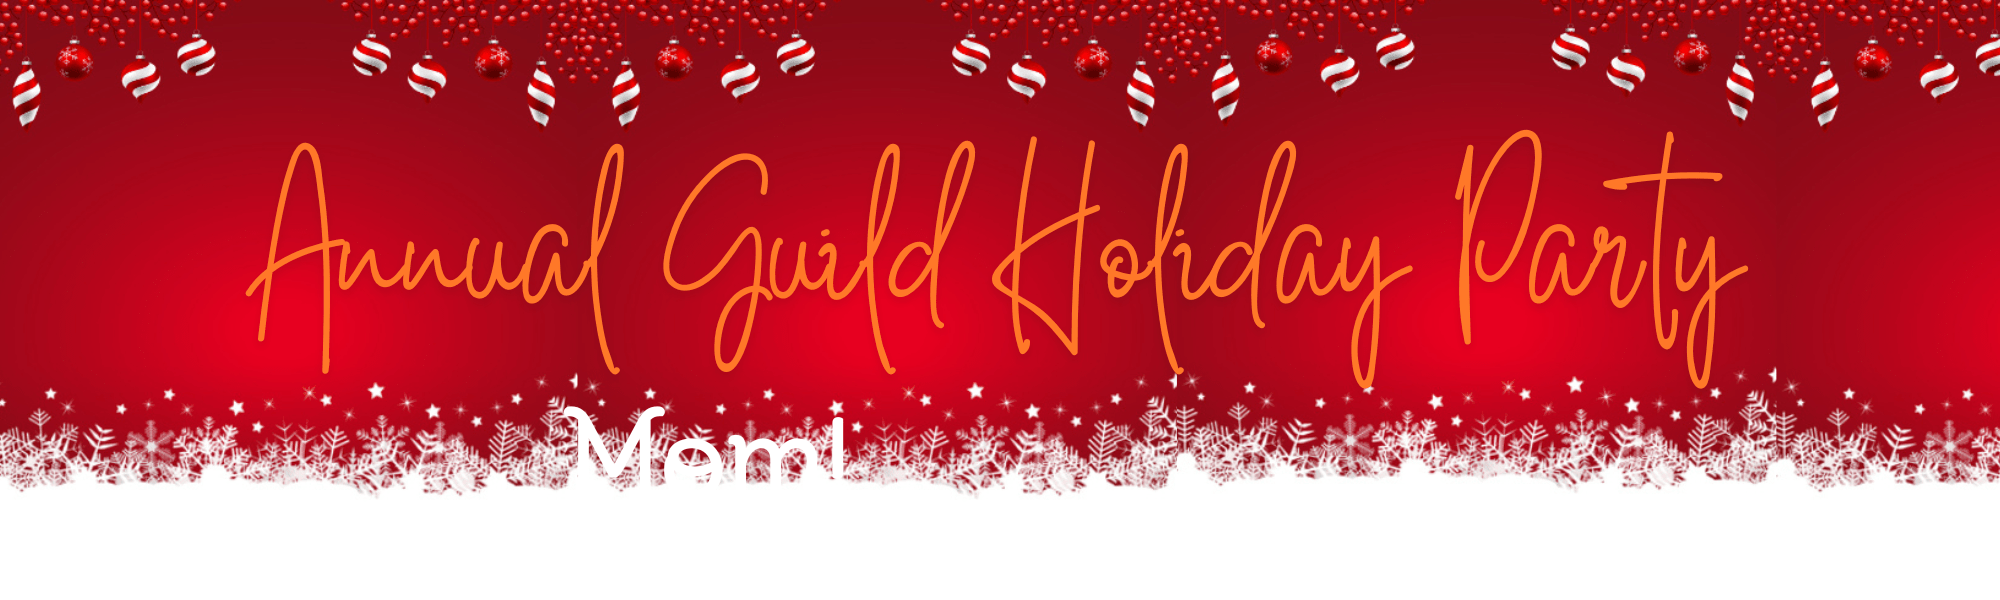 Annual Guild Holiday Party